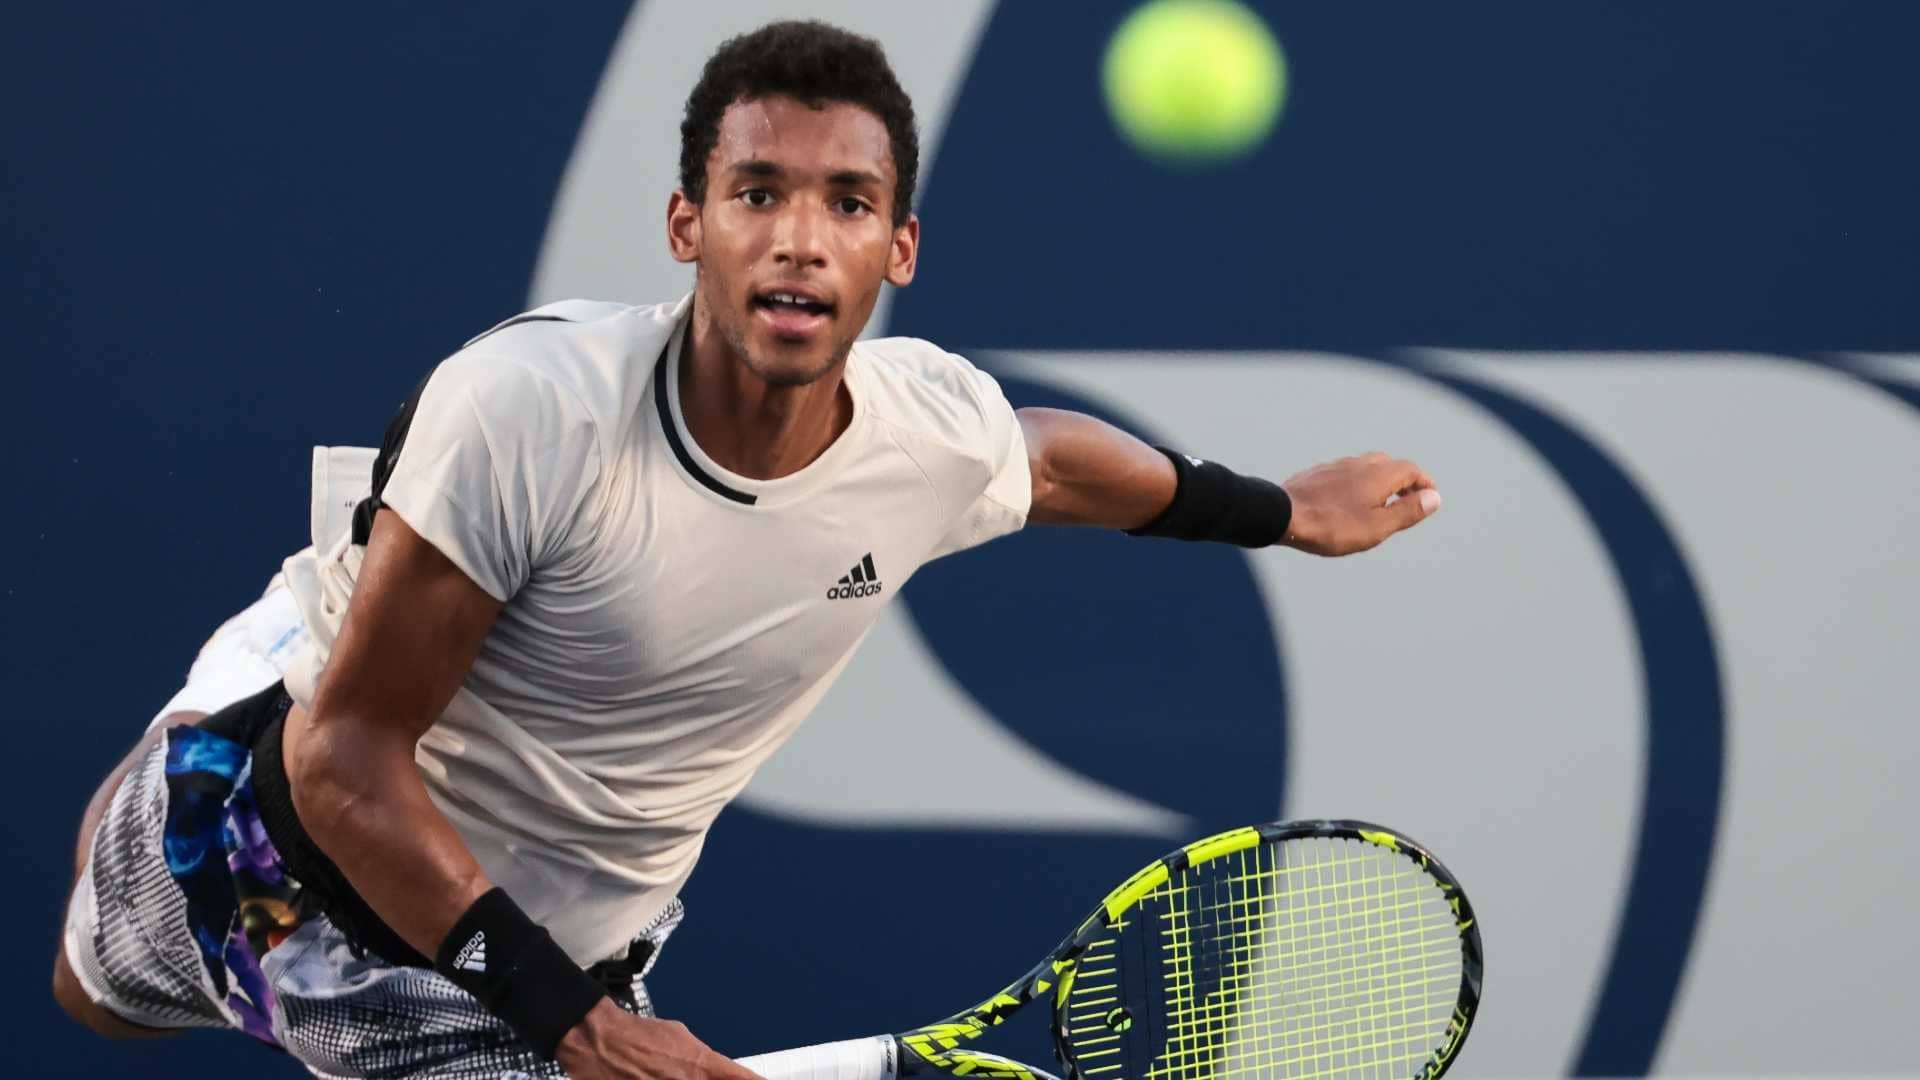 Felix Auger-Aliassime Makes Winning Debut In Los Cabos ATP Tour Tennis